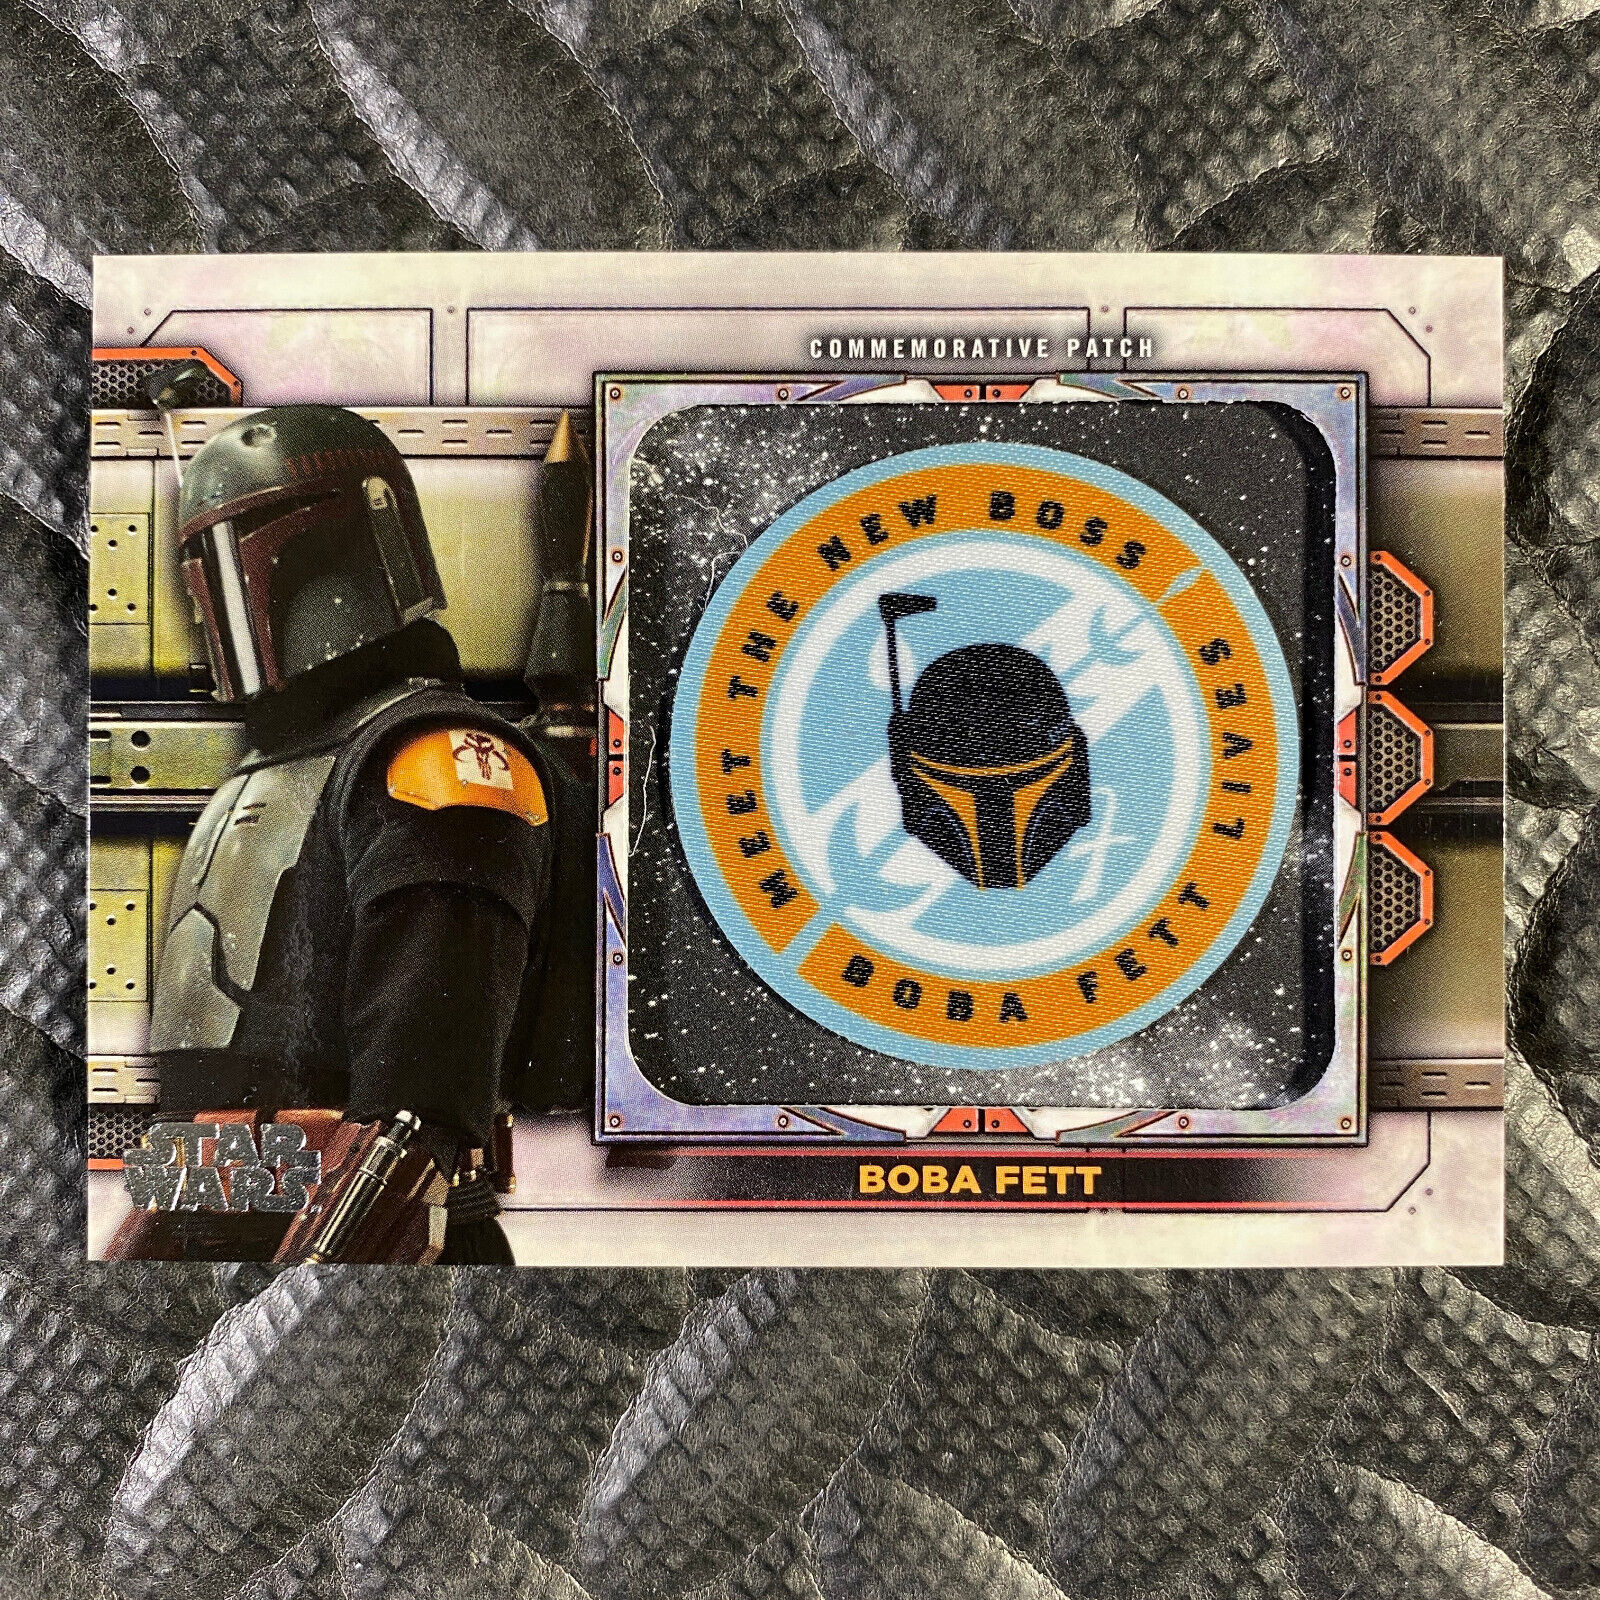 PICK-A-CARD STAR WARS THE BOOK OF BOBA FETT 2022 TOPPS COMEMMORATIVE PATCH CARD